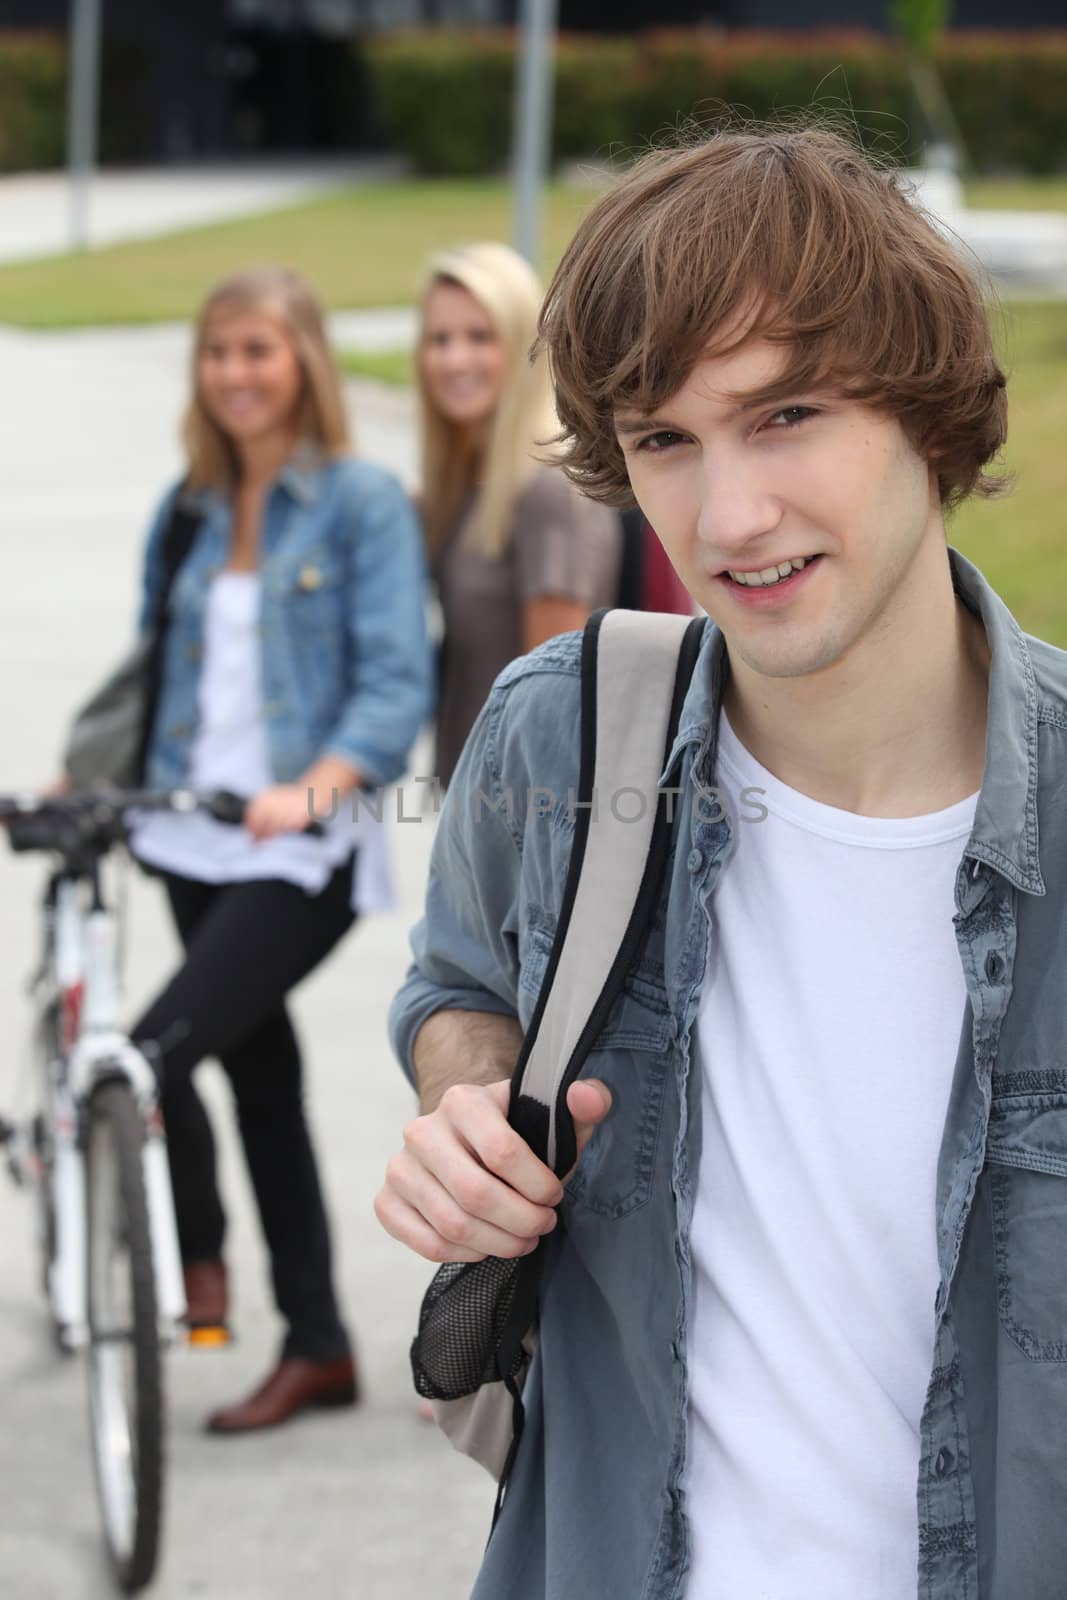 Three teenagers arriving at college by phovoir